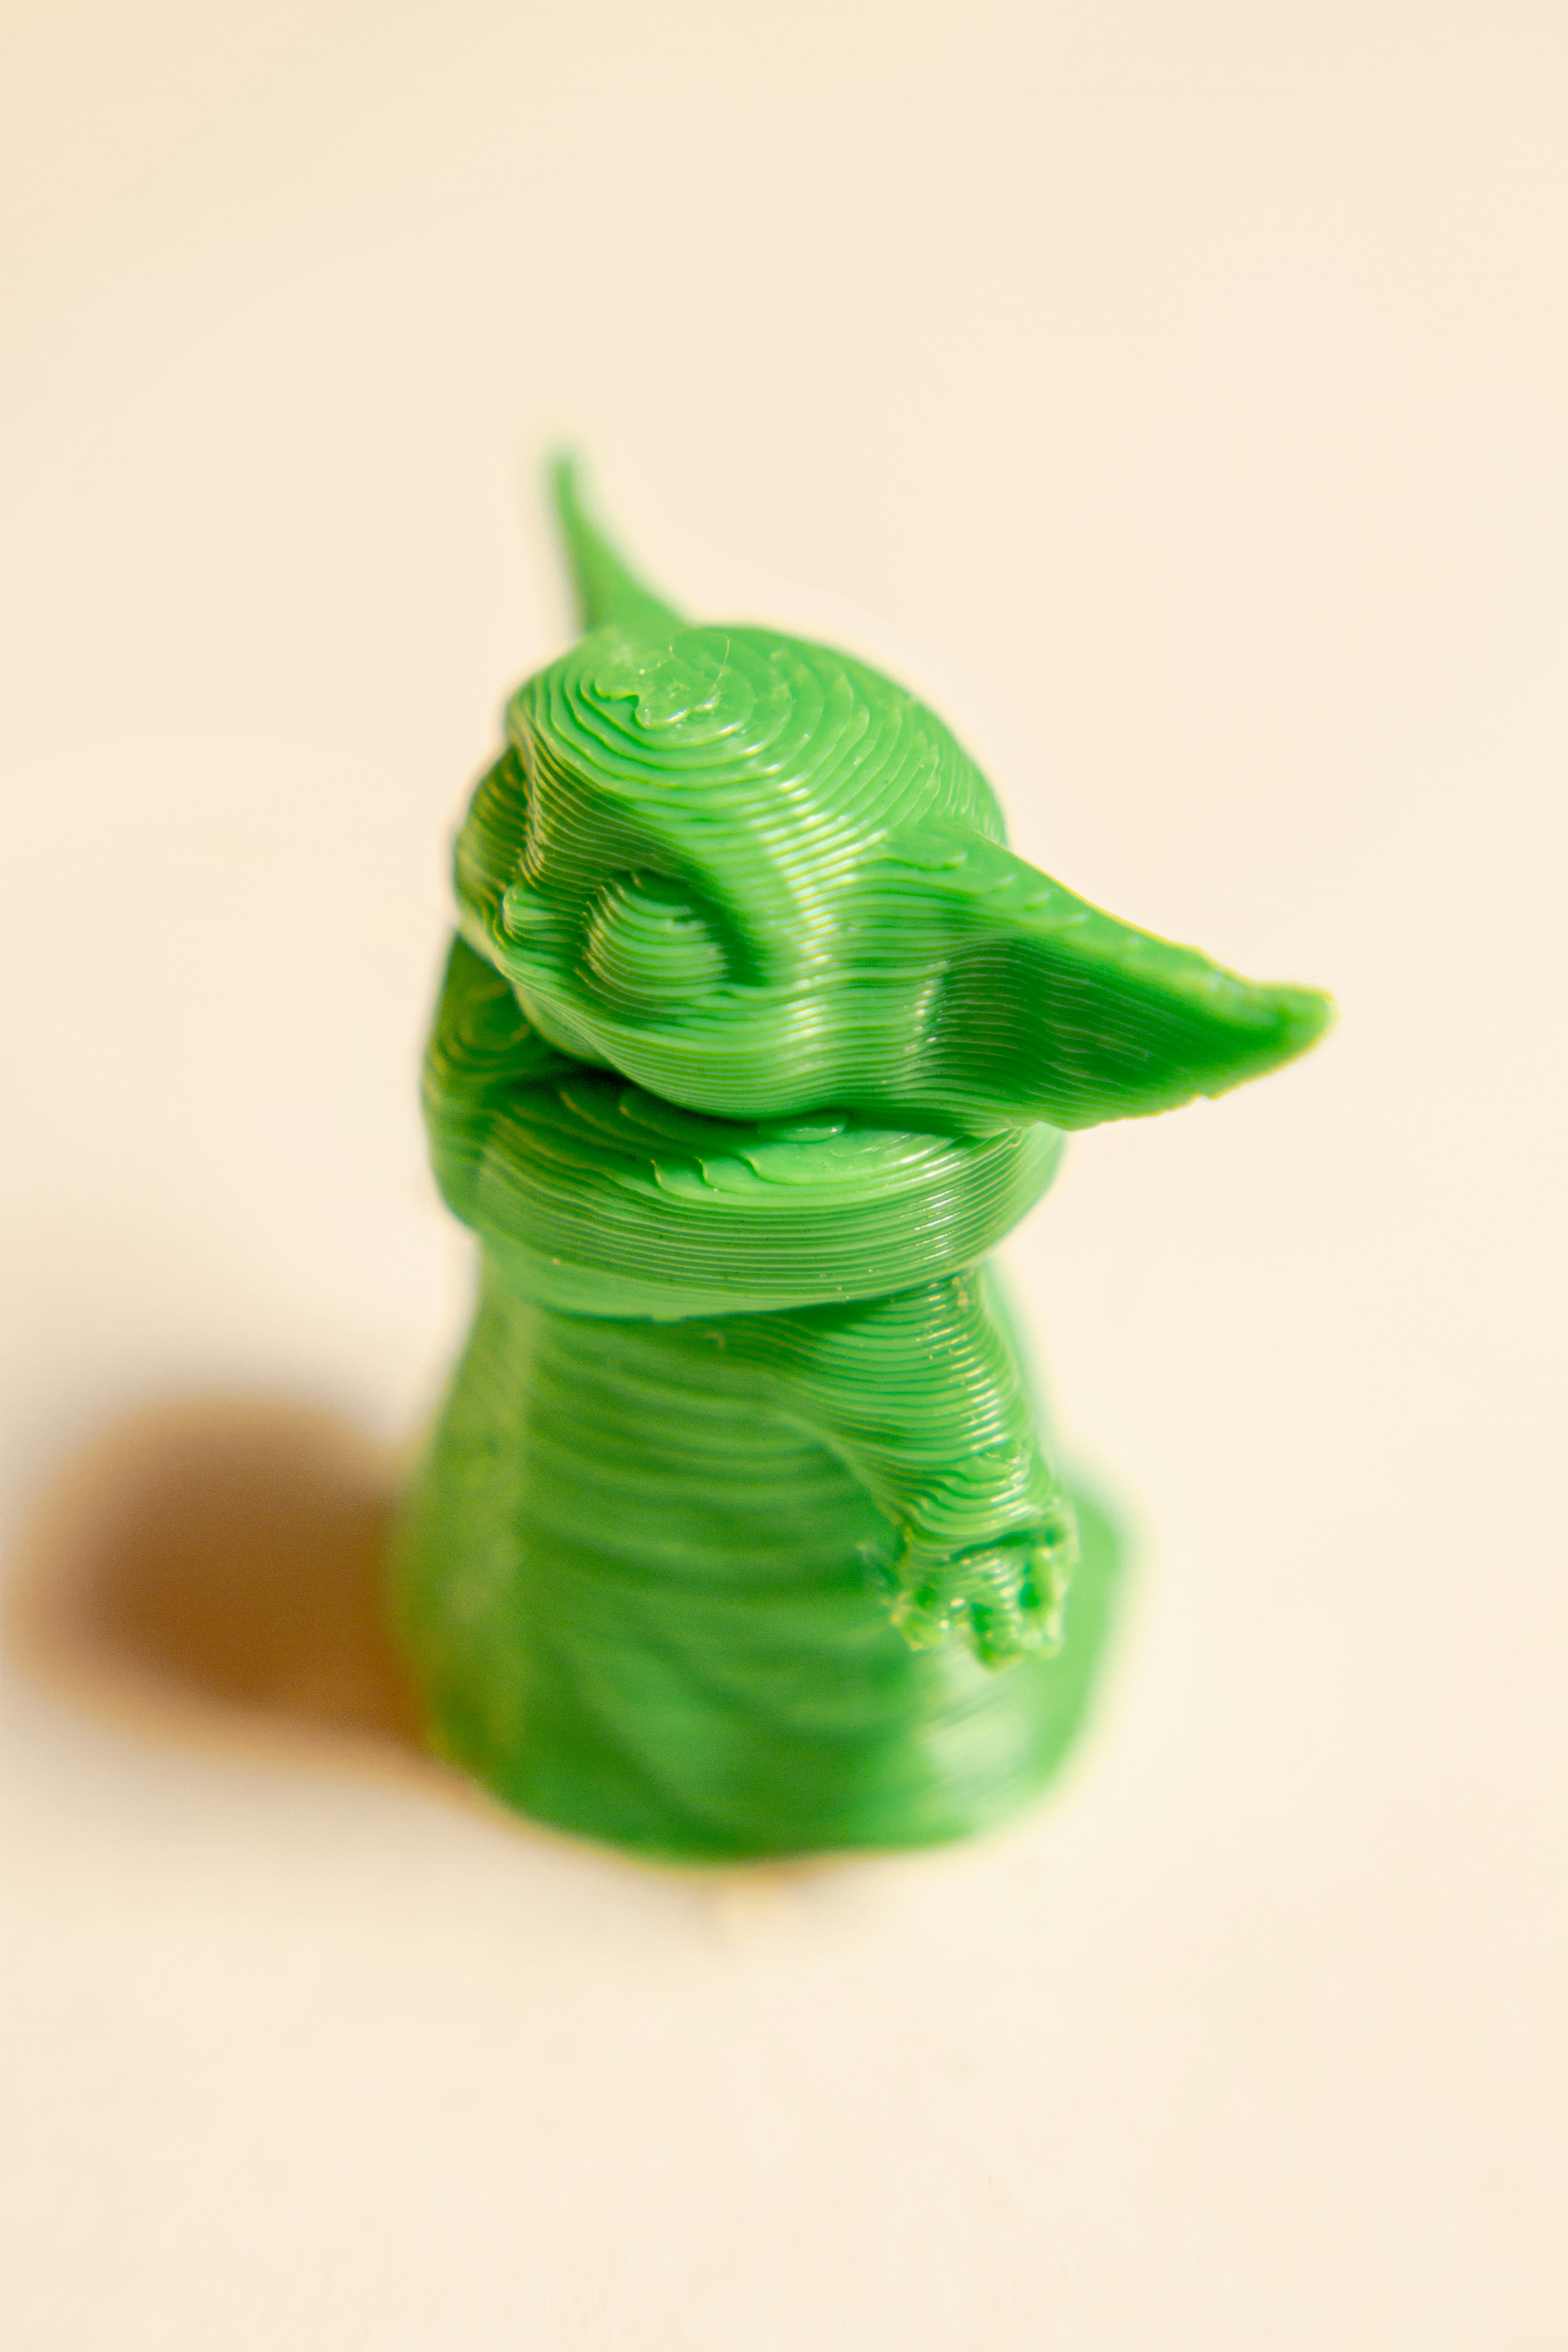 green 3d printed figure of grogu (baby yoda) on neutral background